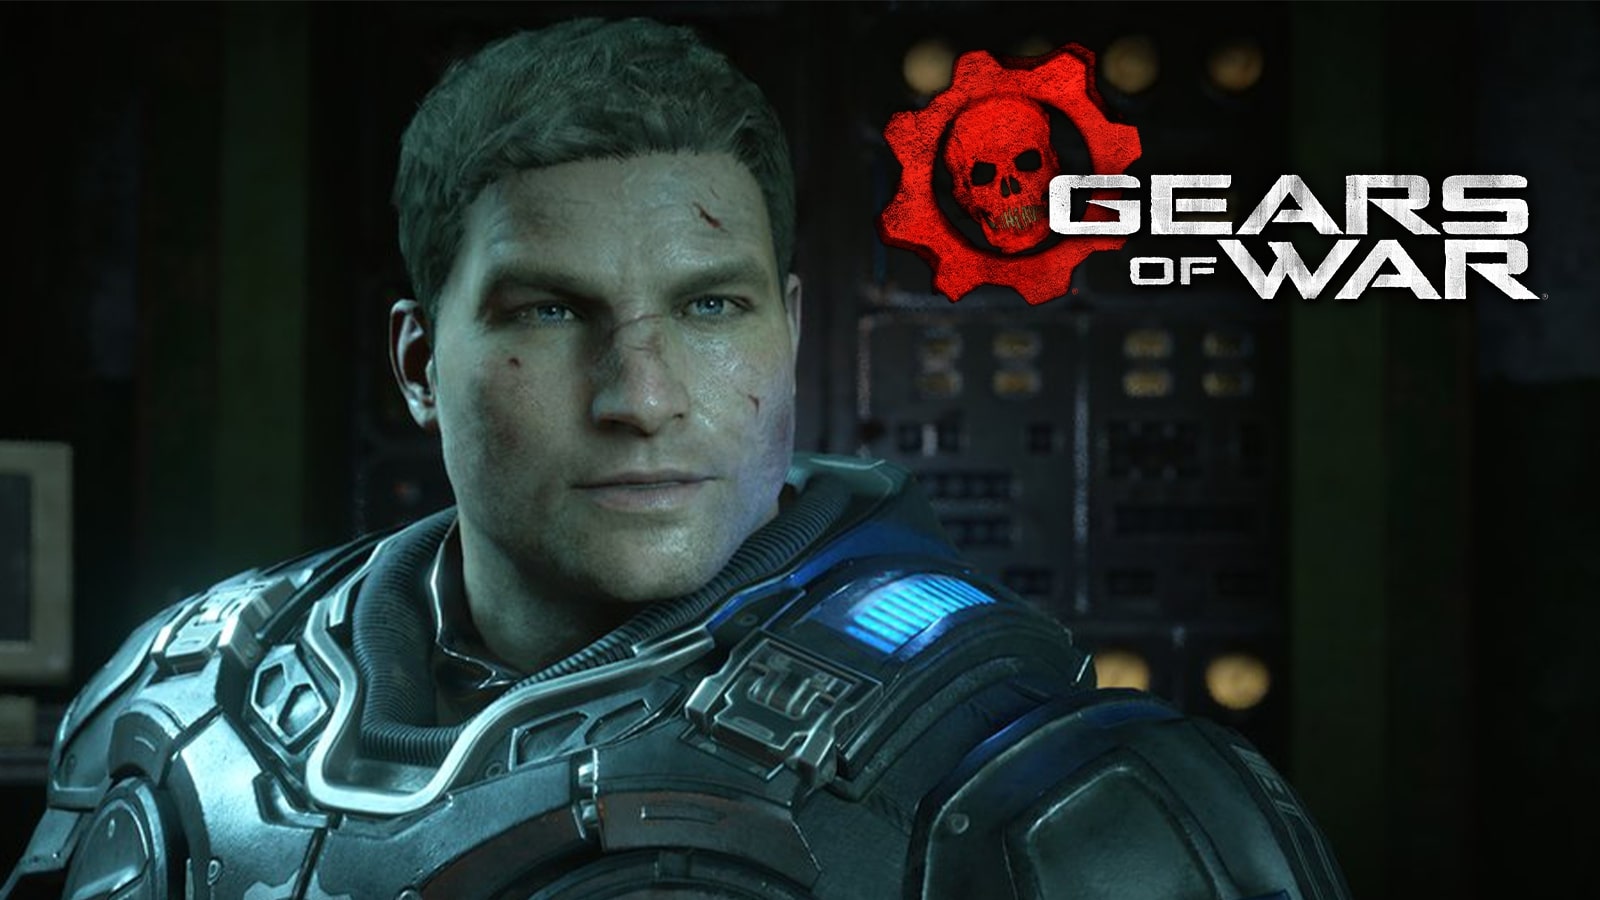 Job Listing Suggests Gears of War 6 is in Development